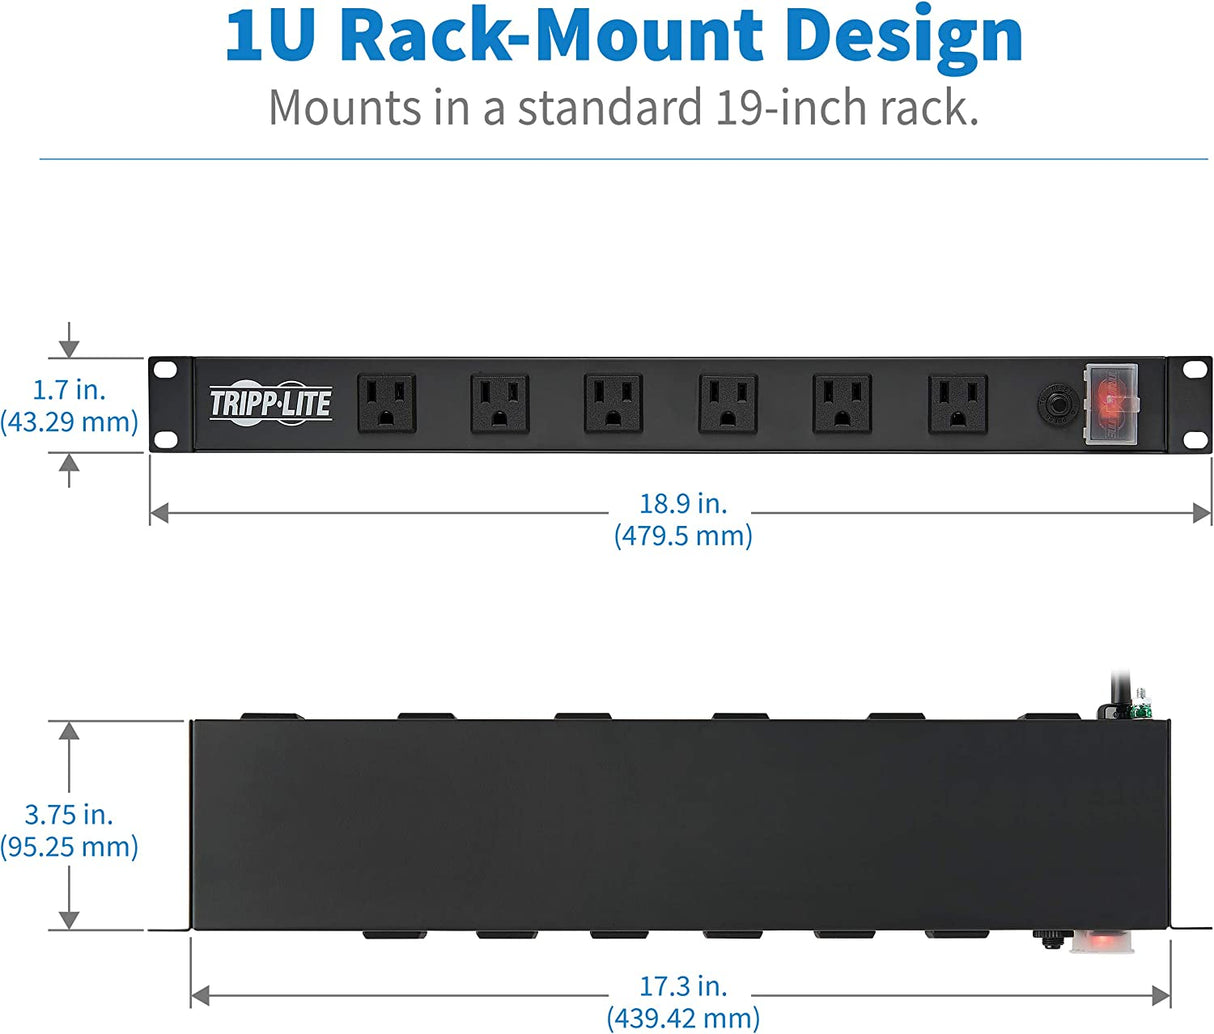 Tripp Lite RS1215-RA Rackmount Network-Grade PDU Power Strip, 12 Right Angle Outlets Wide-Spaced, 15A, 15ft Cord w/ 5-15P Plug,, Black 15A + Right Angle Outlet Single